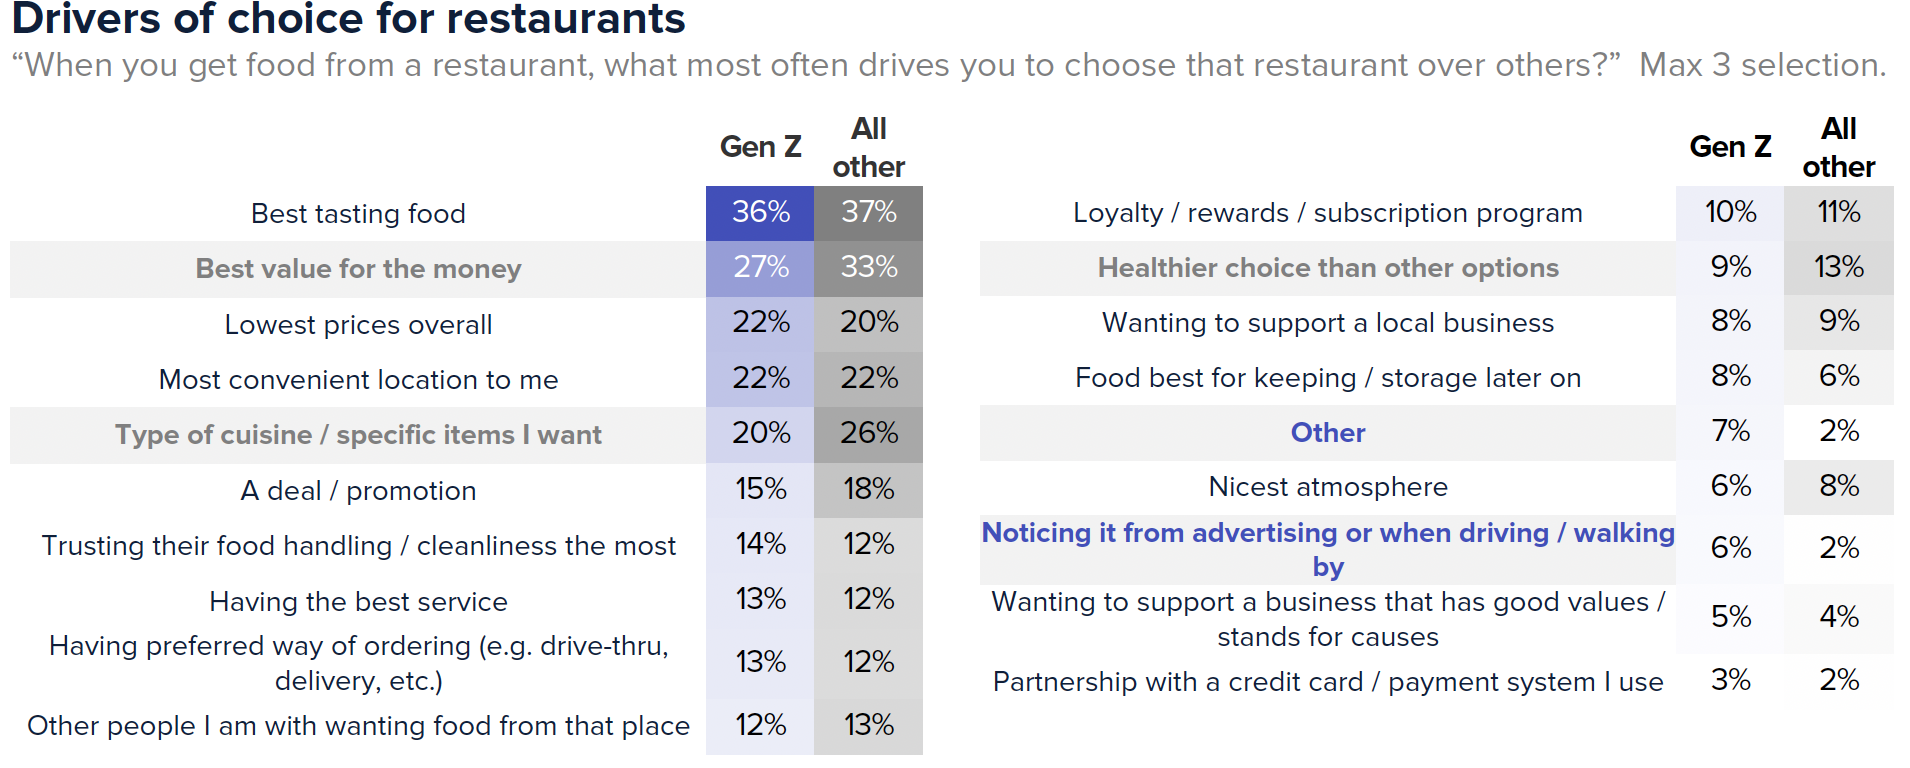 Drivers of choice for restaurants. Choosing for best tasting food or best value actually trails behind other generations, but they’re more likely to care about the cleanliness of the place (14% vs 12%)